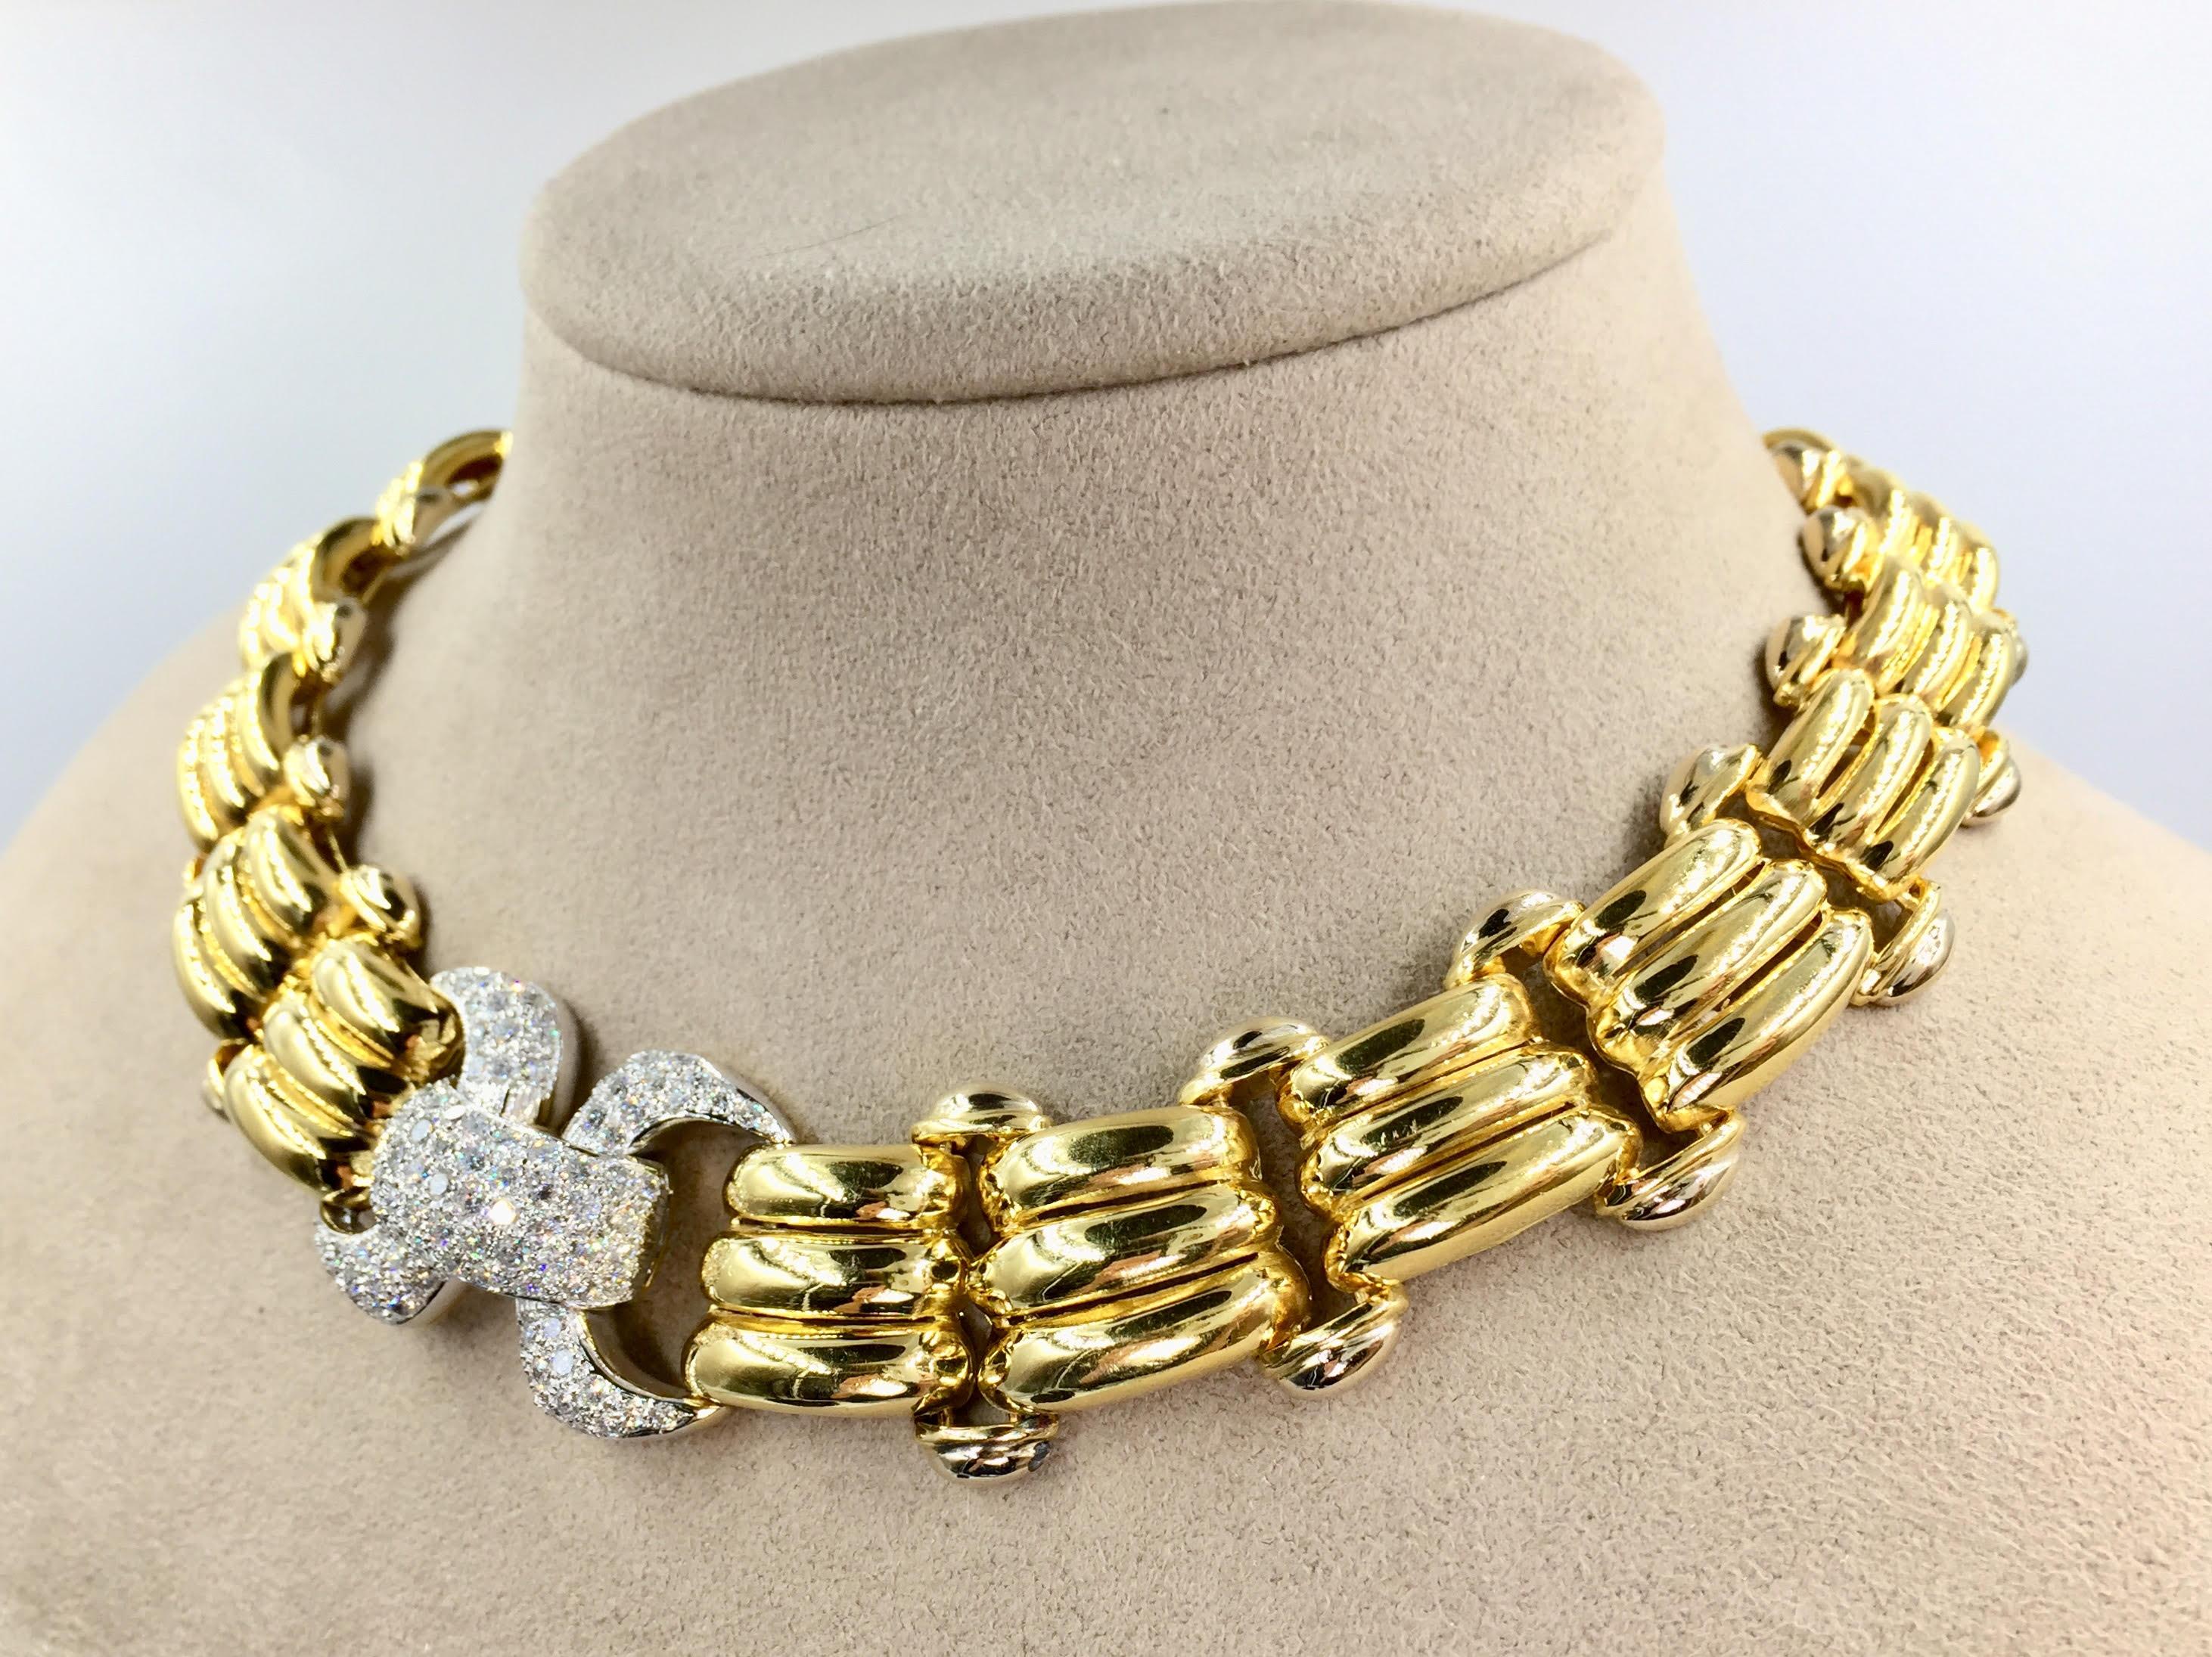 18 Karat Solid Gold Diamond Link Necklace 5.25 Diamond Carat Total Weight In Good Condition For Sale In Pikesville, MD